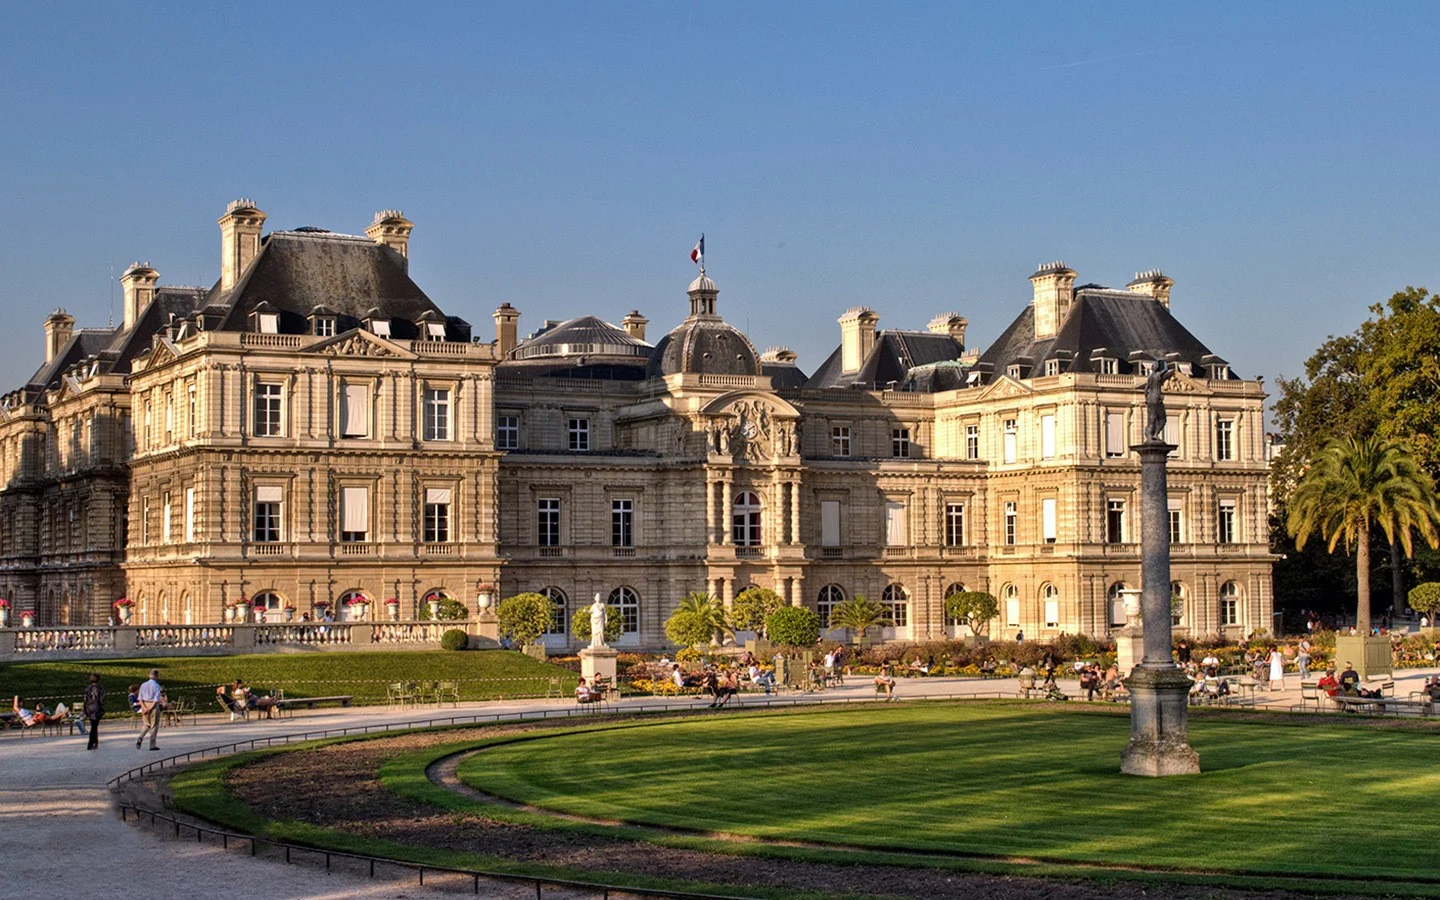 The Luxembourg Palace and gardens in Paris